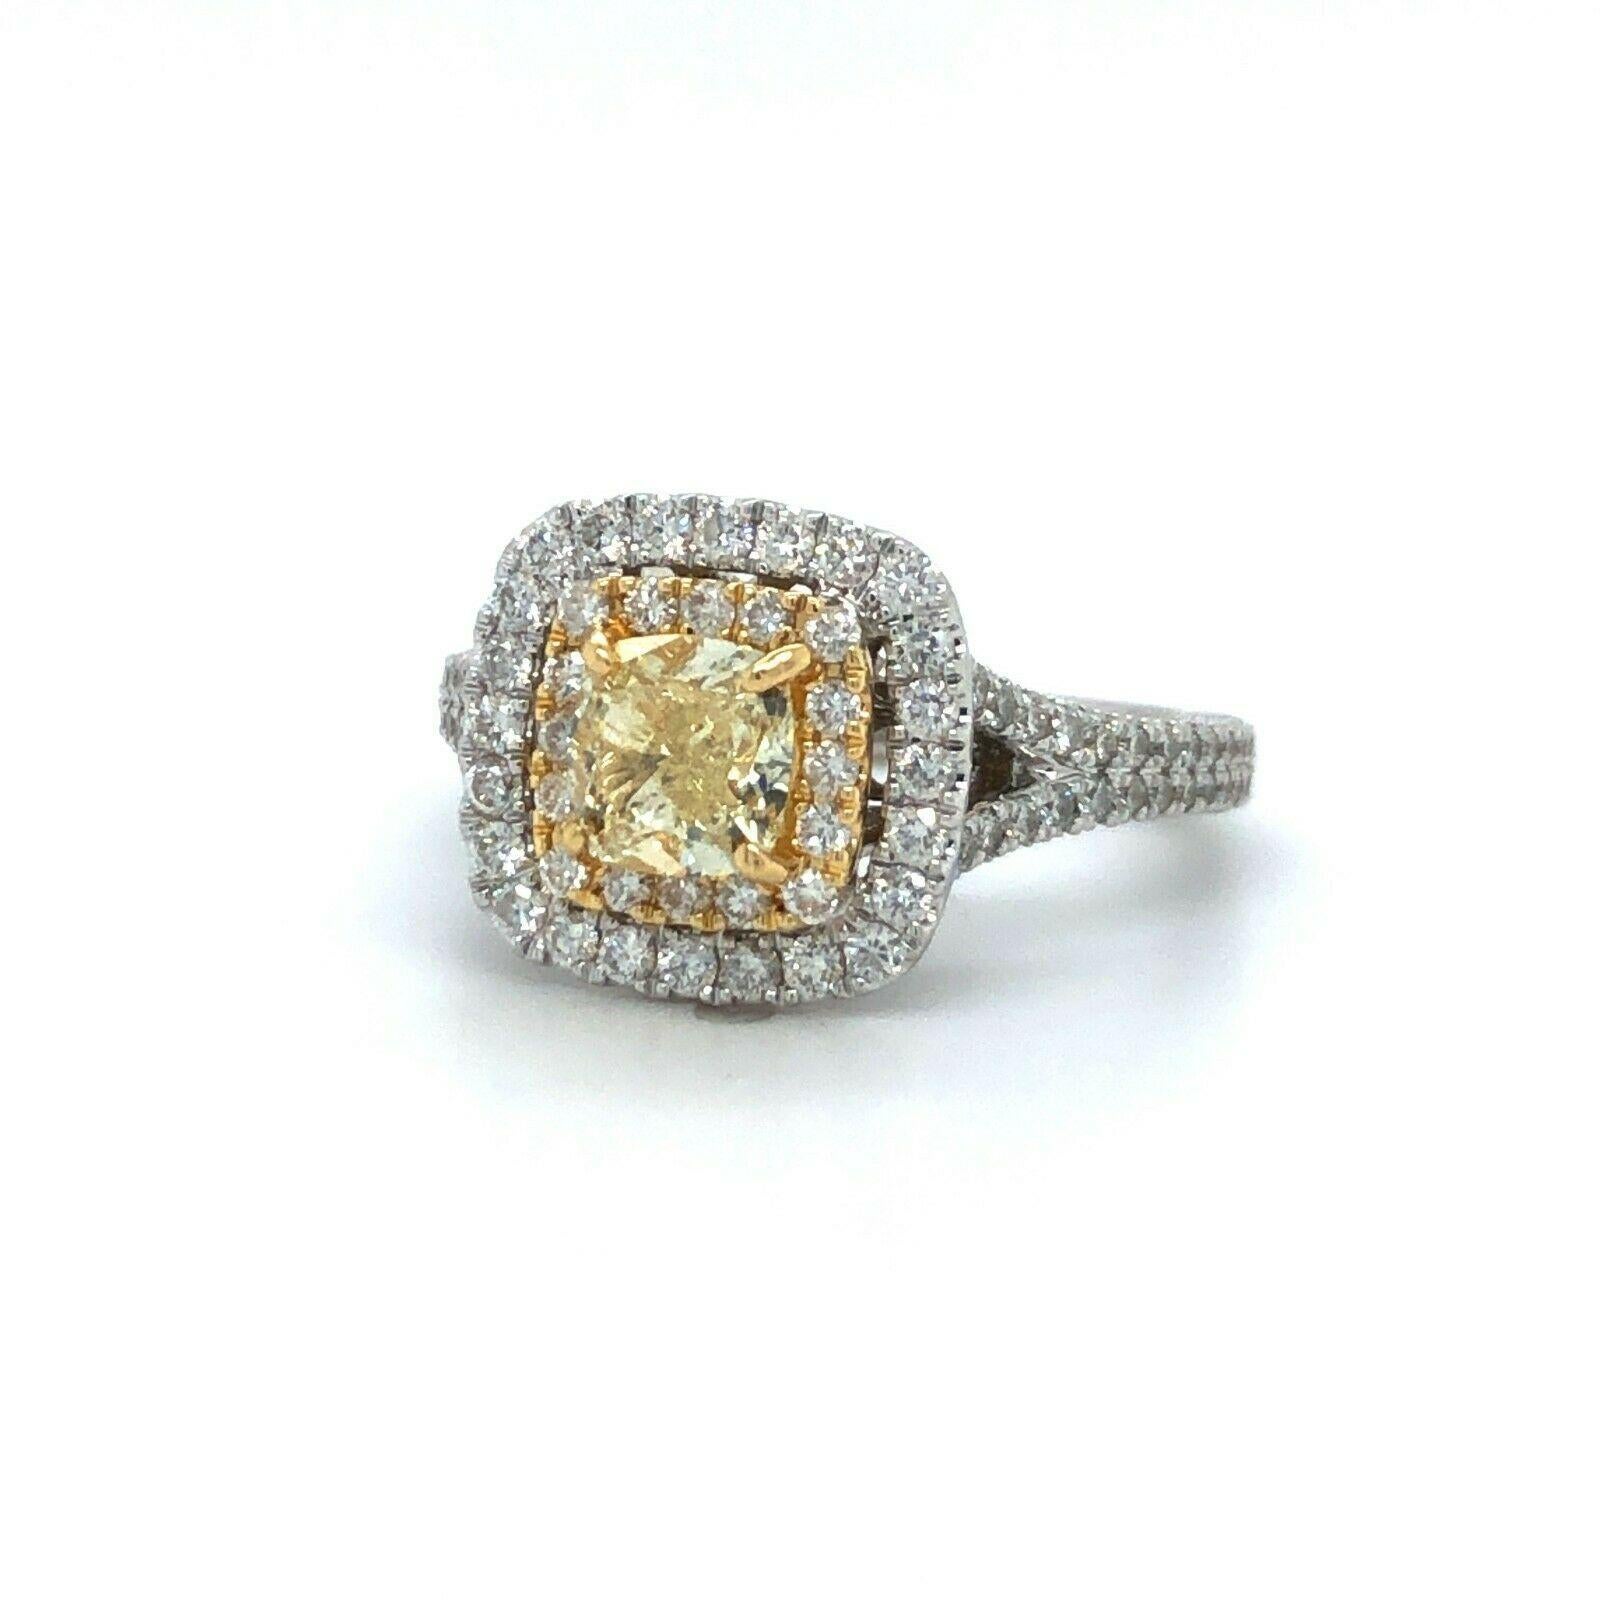 Neil Lane 2.06ctw Yellow Diamond Cushion Double Halo Engagement Ring Size 6.5

Condition:  Excellent Condition, Professionally Cleaned and Polished
Metal:  18k and 14k Gold (Marked, and Professionally Tested)
Center Diamond:  1.00ct Fancy Light